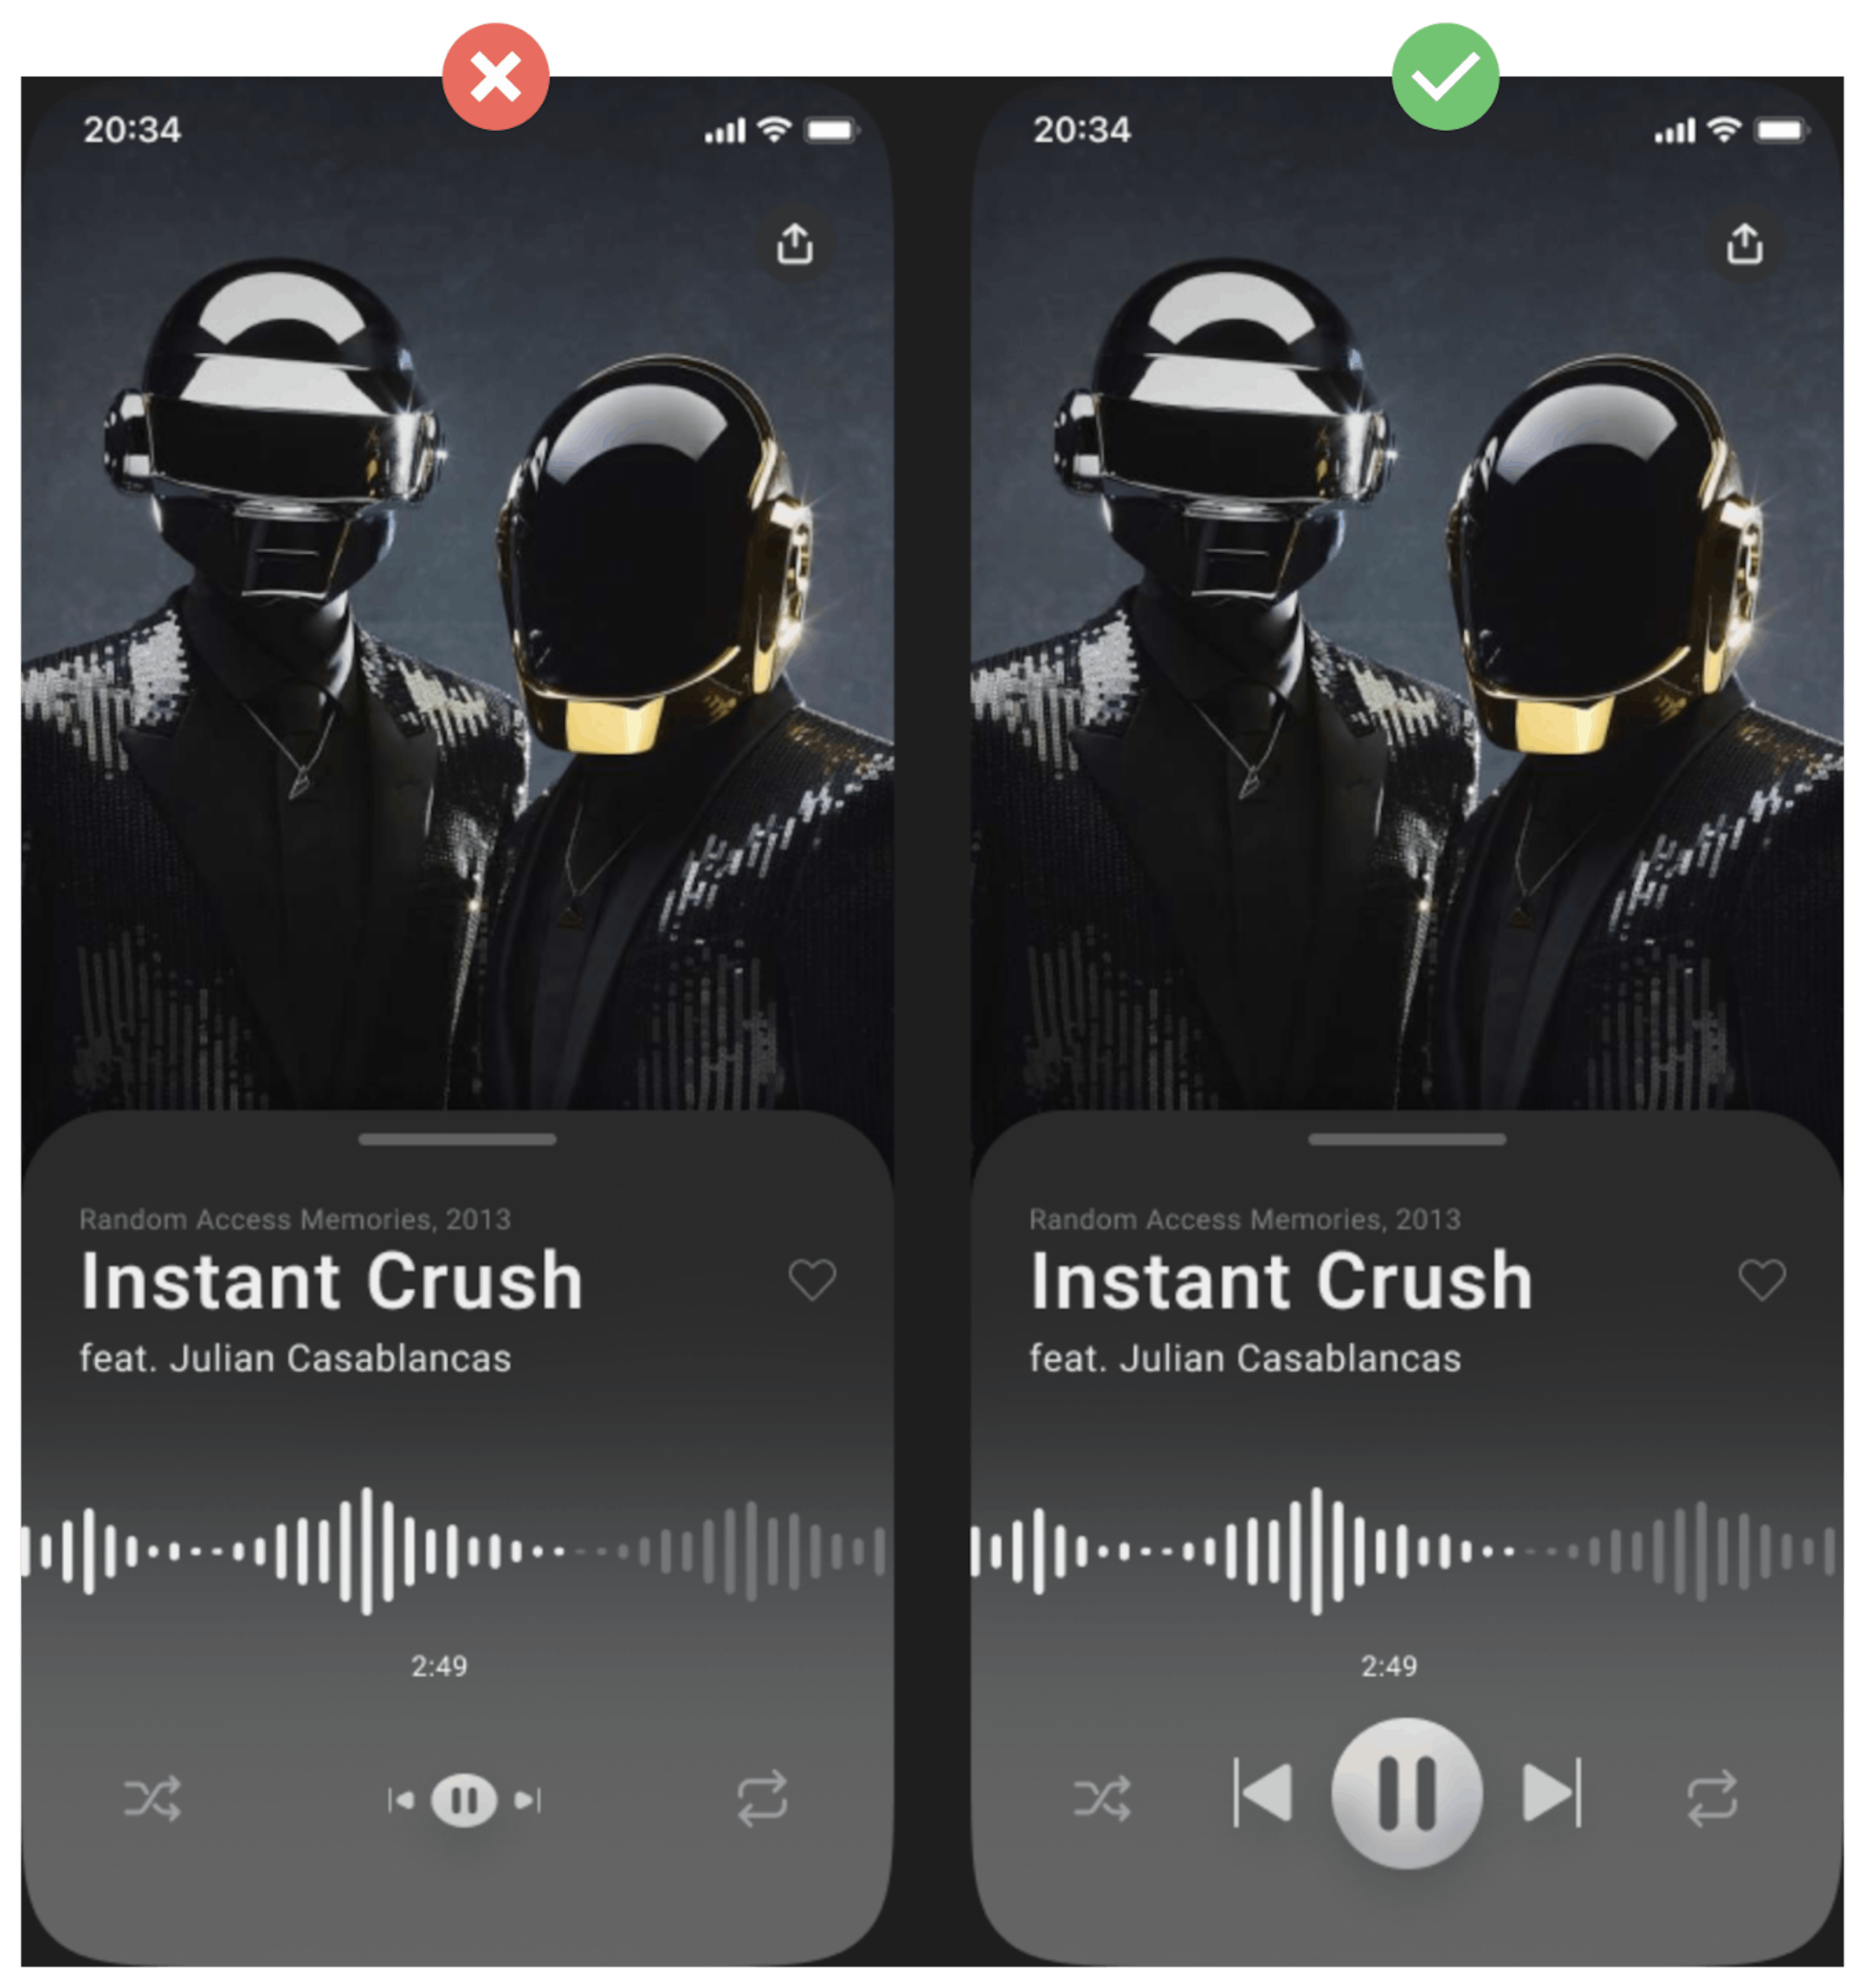 In the left image touch target to play music is too small. The image is designed by using a free Figma template from Stefan Cristian